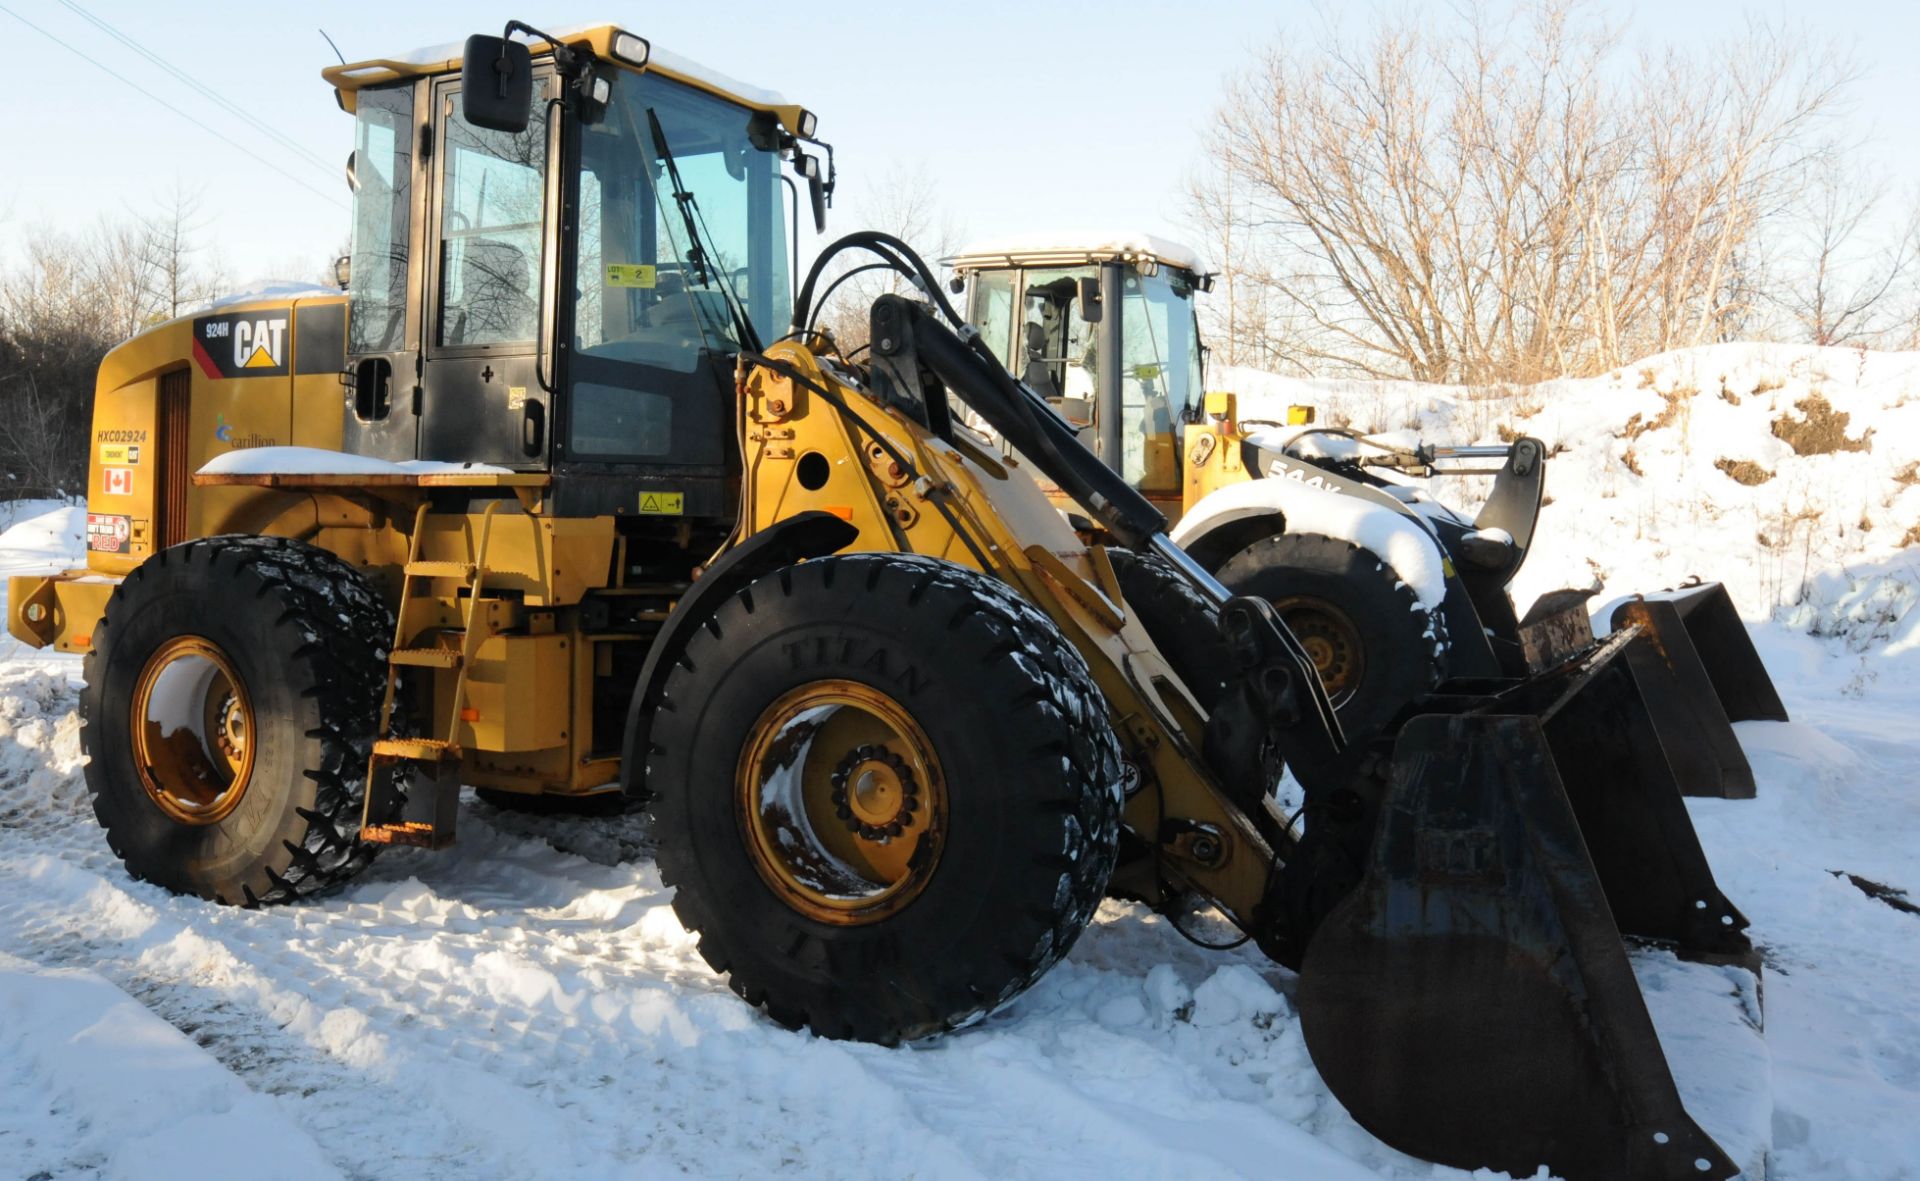 CATERPILLAR (2011) 924H ARTICULATING FRONT END WHEEL LOADER WITH CAT BUCKET ATTACHMENT, APPROX. 2, - Image 4 of 17